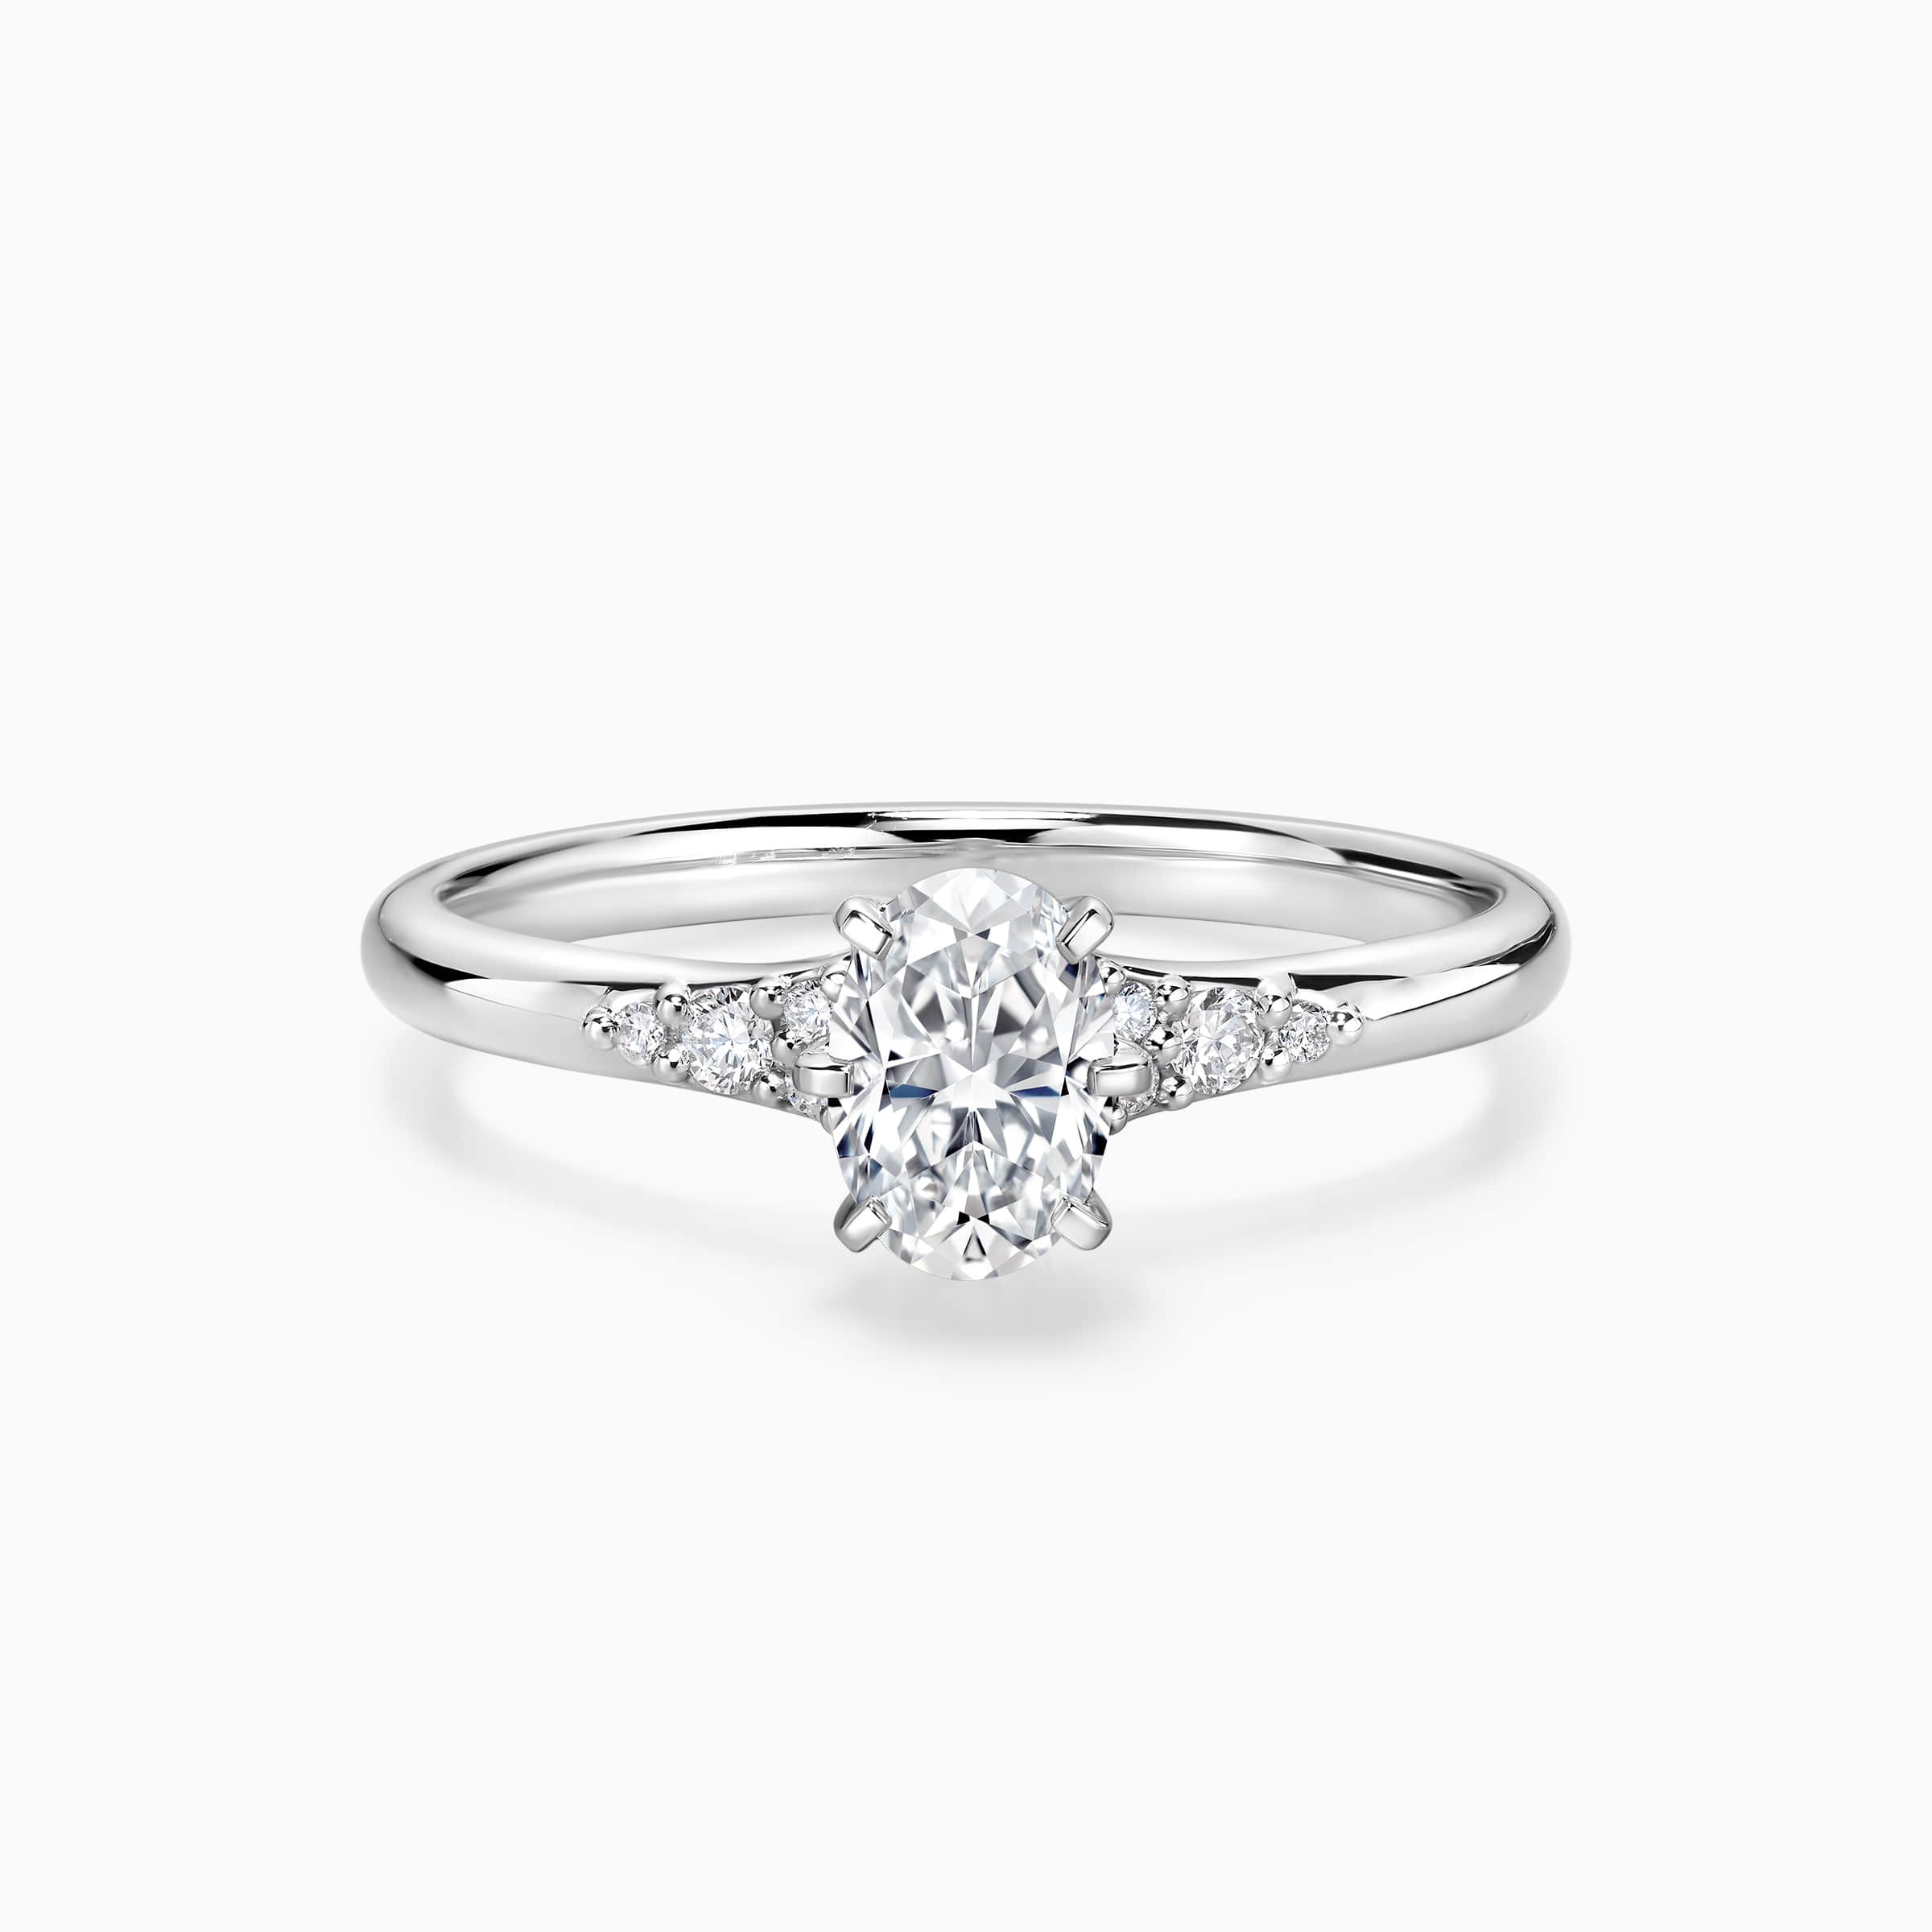 Darry Ring oval cut promise ring wirh side stones in white gold